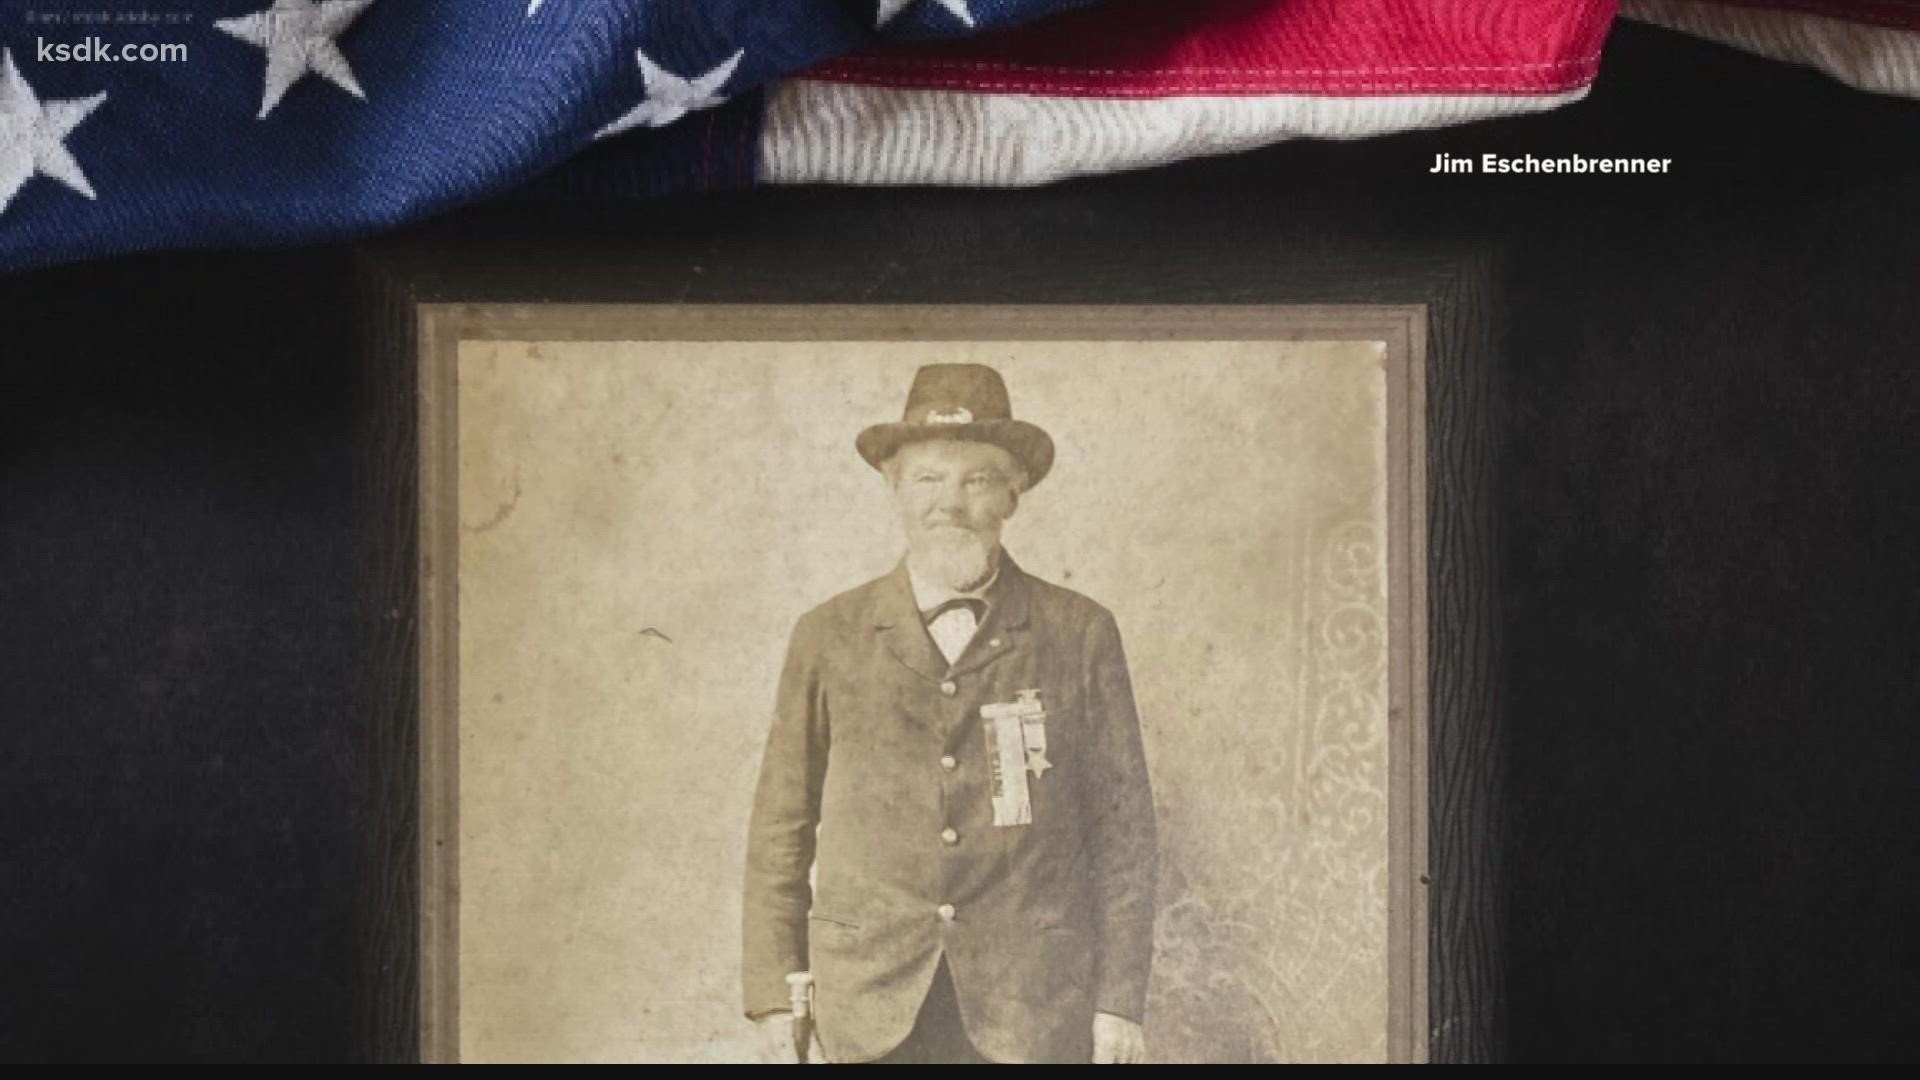 Henry Seibel is the great-grandfather of viewer Jim Eschenbrenner, of Ballwin, who shared photos and the amazing story of Seibel's service in the Civil War.